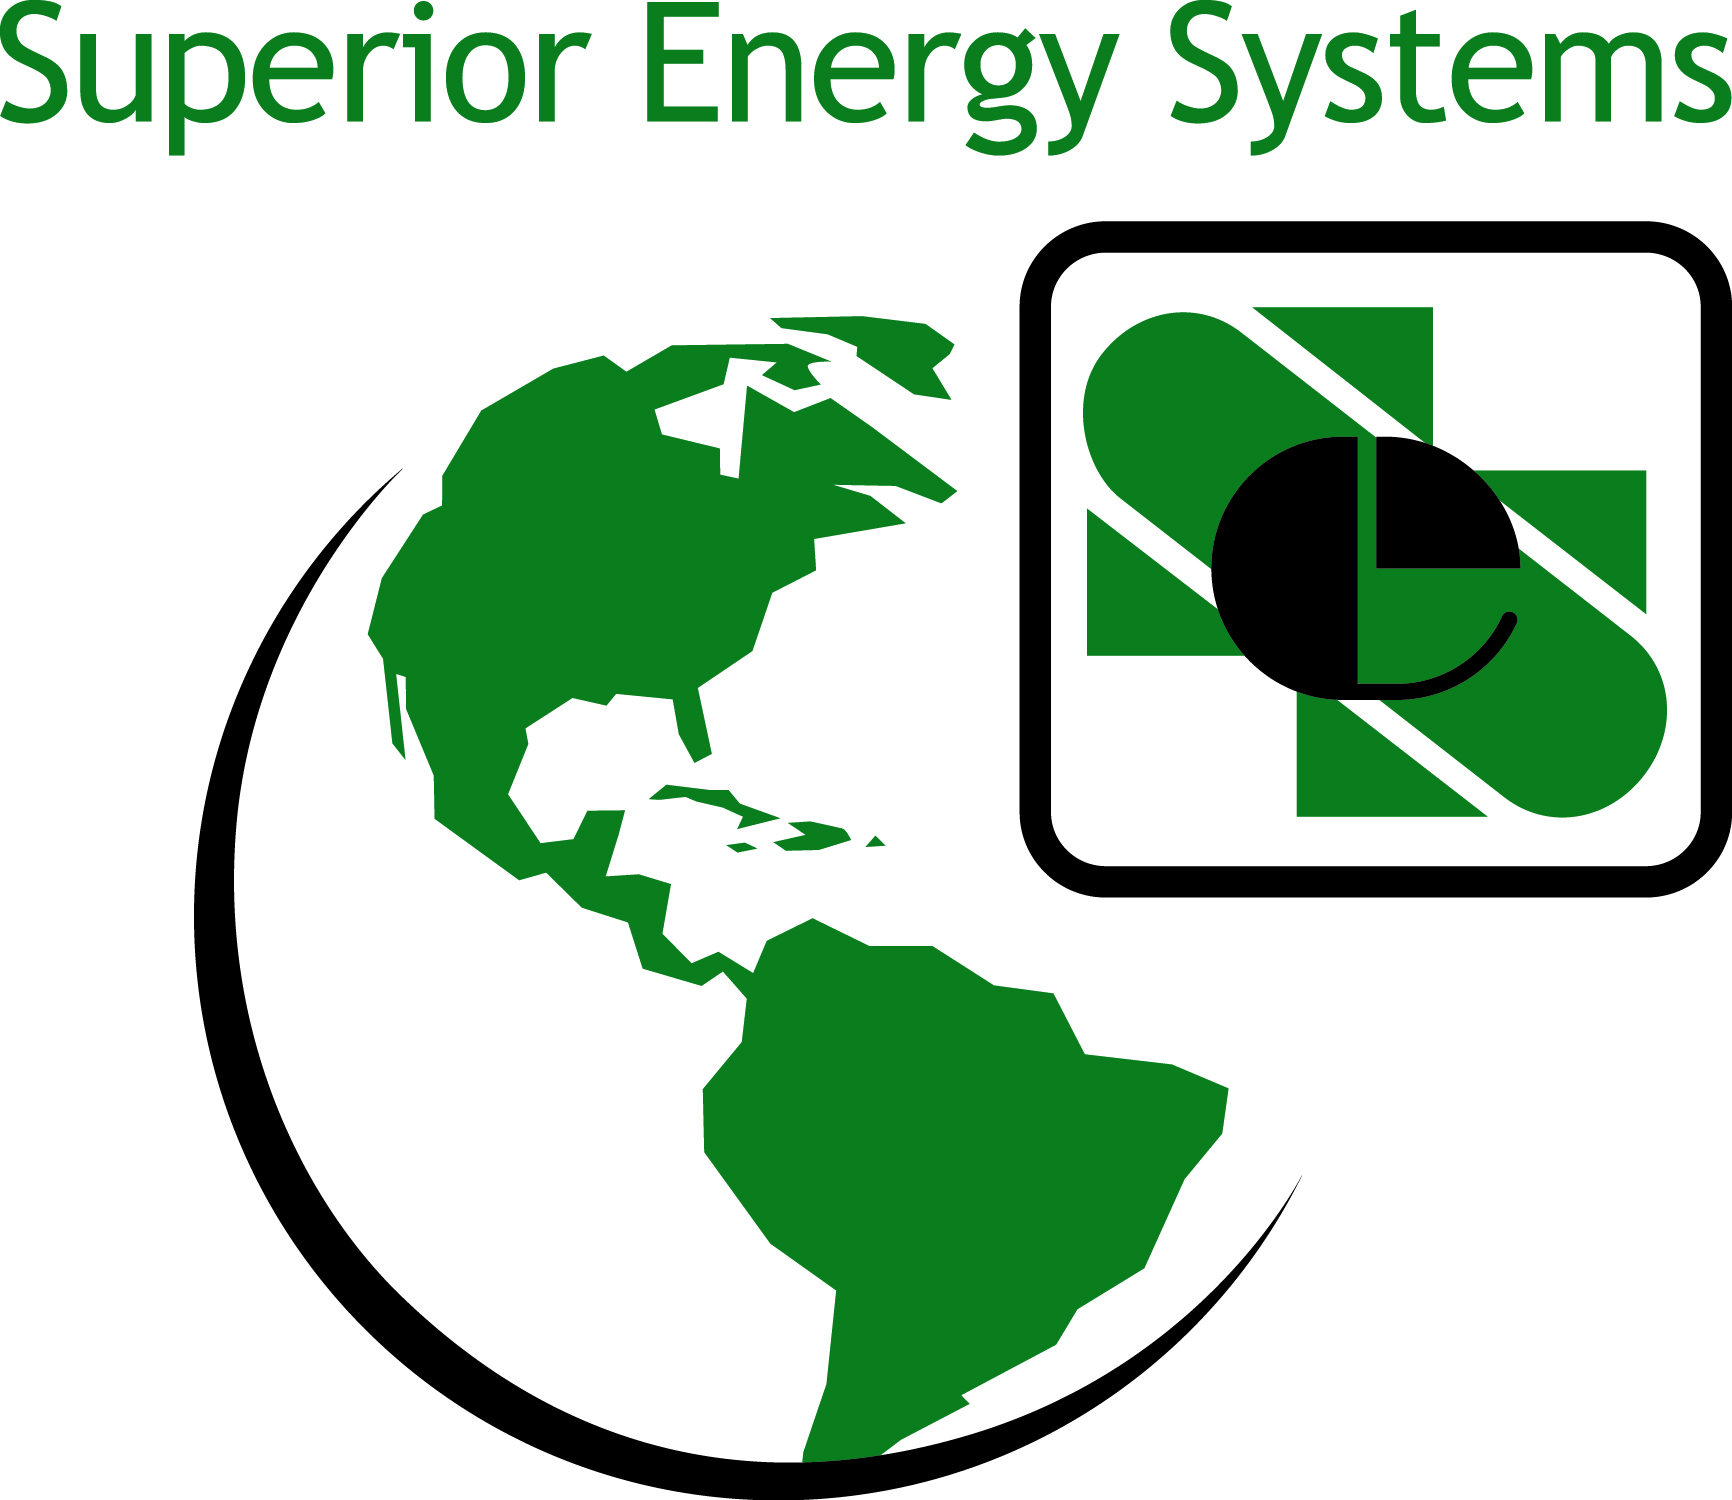 Superior Energy Systems supplies propane infrastructure and services, bringing together engineering, manufacturing and construction expertise.